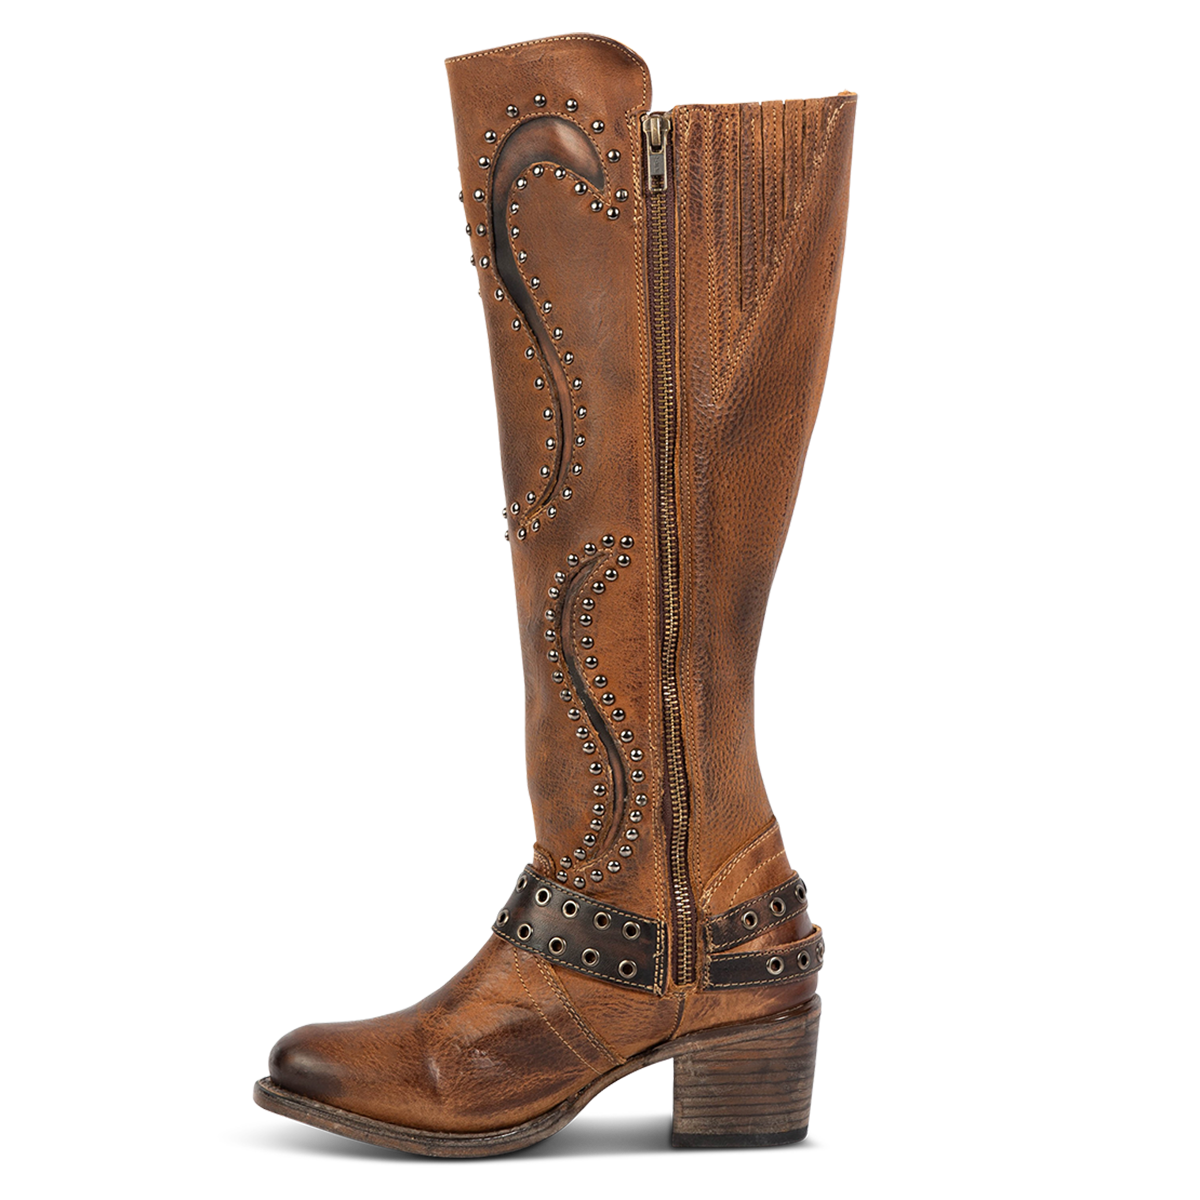 Inside view showing full inside working brass zipper and stud and stitch detailing on FREEBIRD women's Coyote brown leather knee high boot